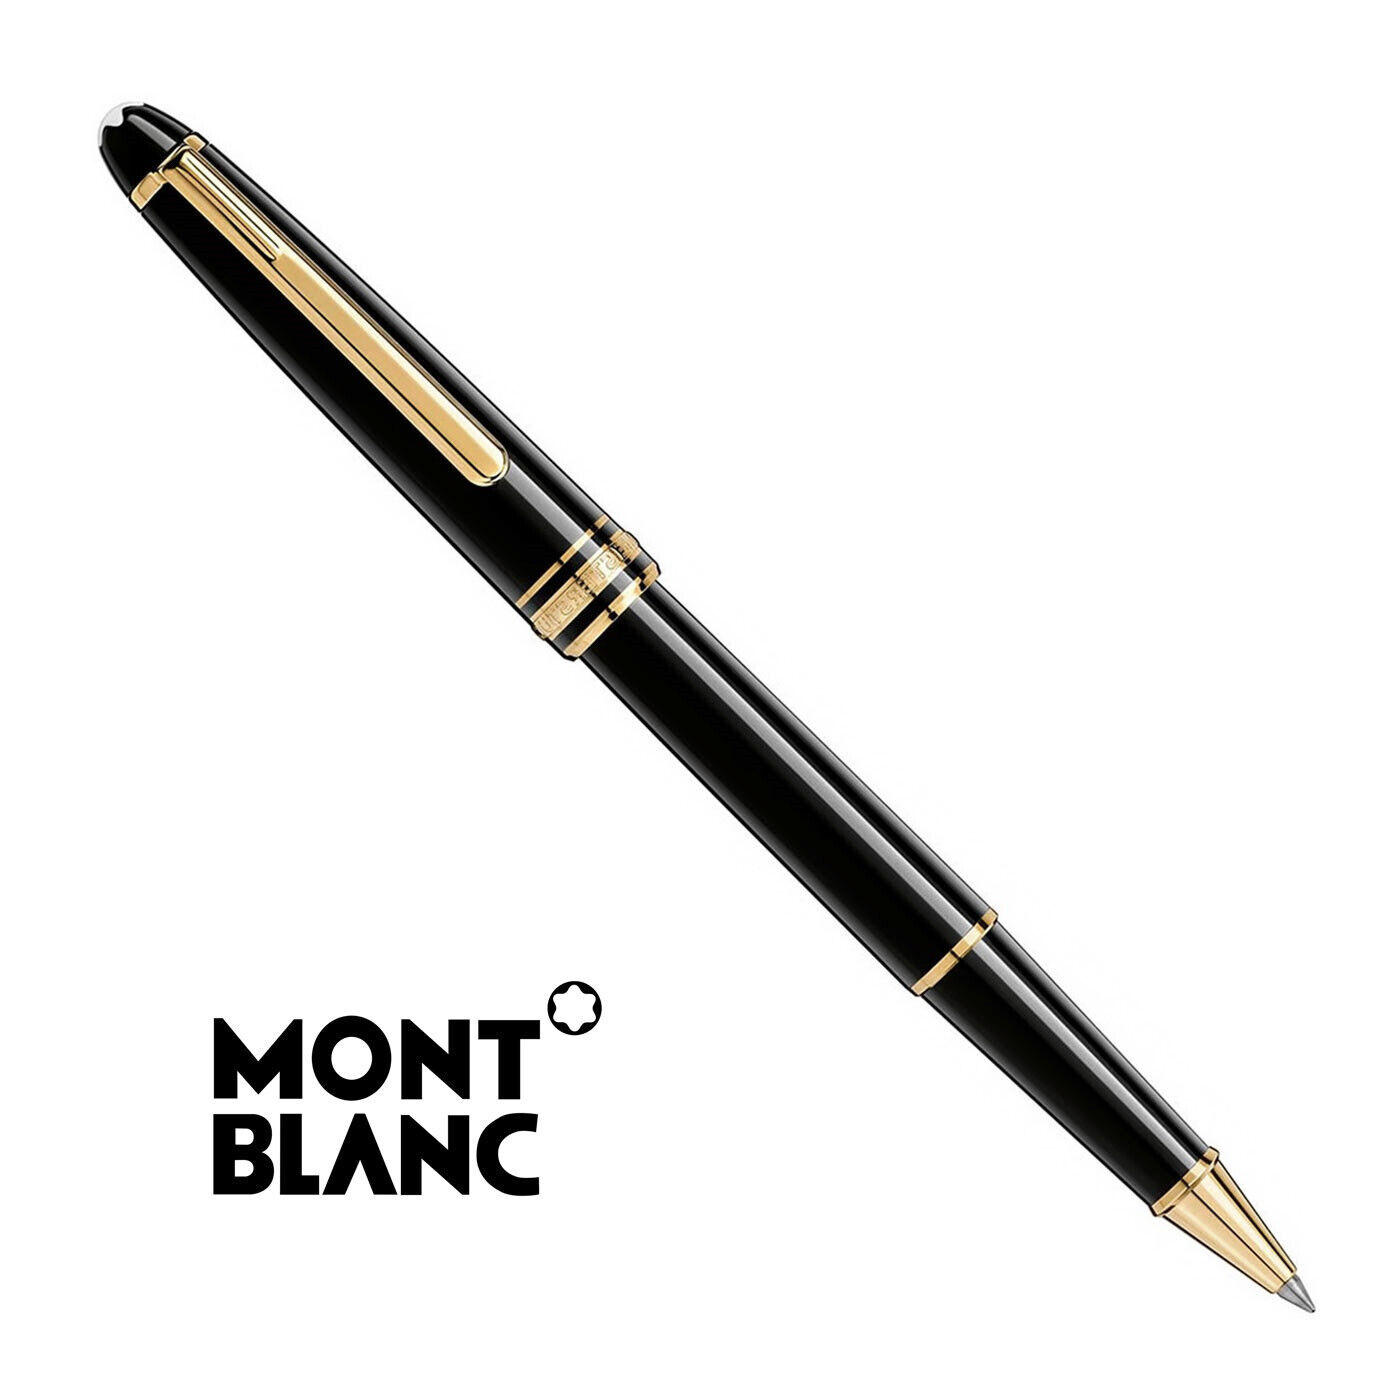 New Authentic Montblanc Meisterstuck Gold Coated Rollerball Pen Save upto 50%